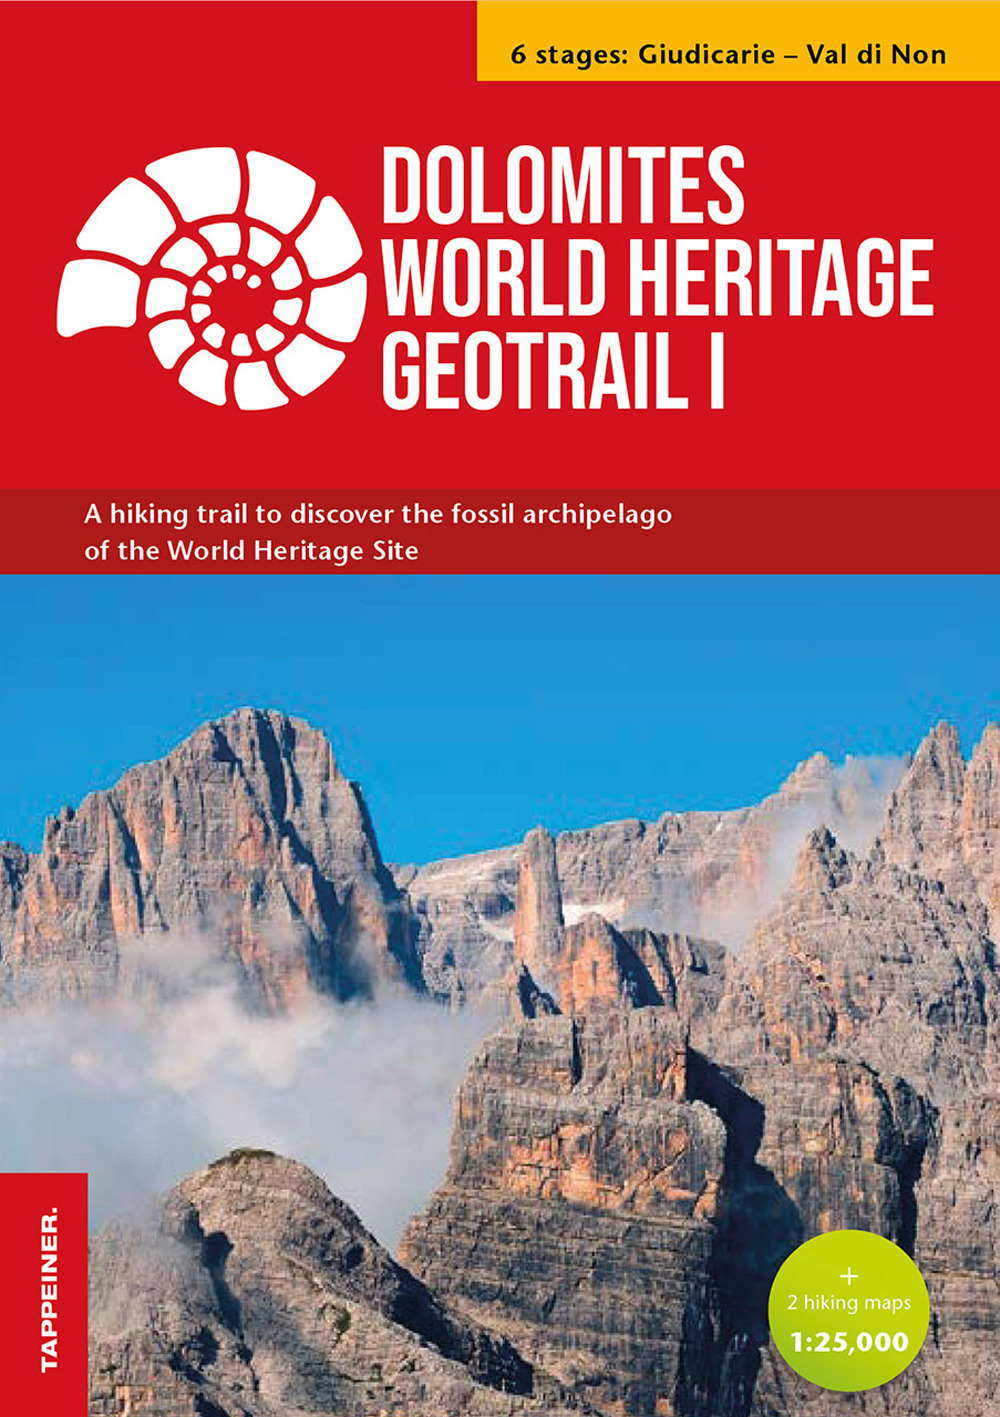 Dolomites World Heritage geotrail. A hiking trail to discover the fossil archipelago of the World Heritage Site. Con 2 hiking maps 1:25.000. Vol. 1: Giudicarie-Valle di Non (Trentino)